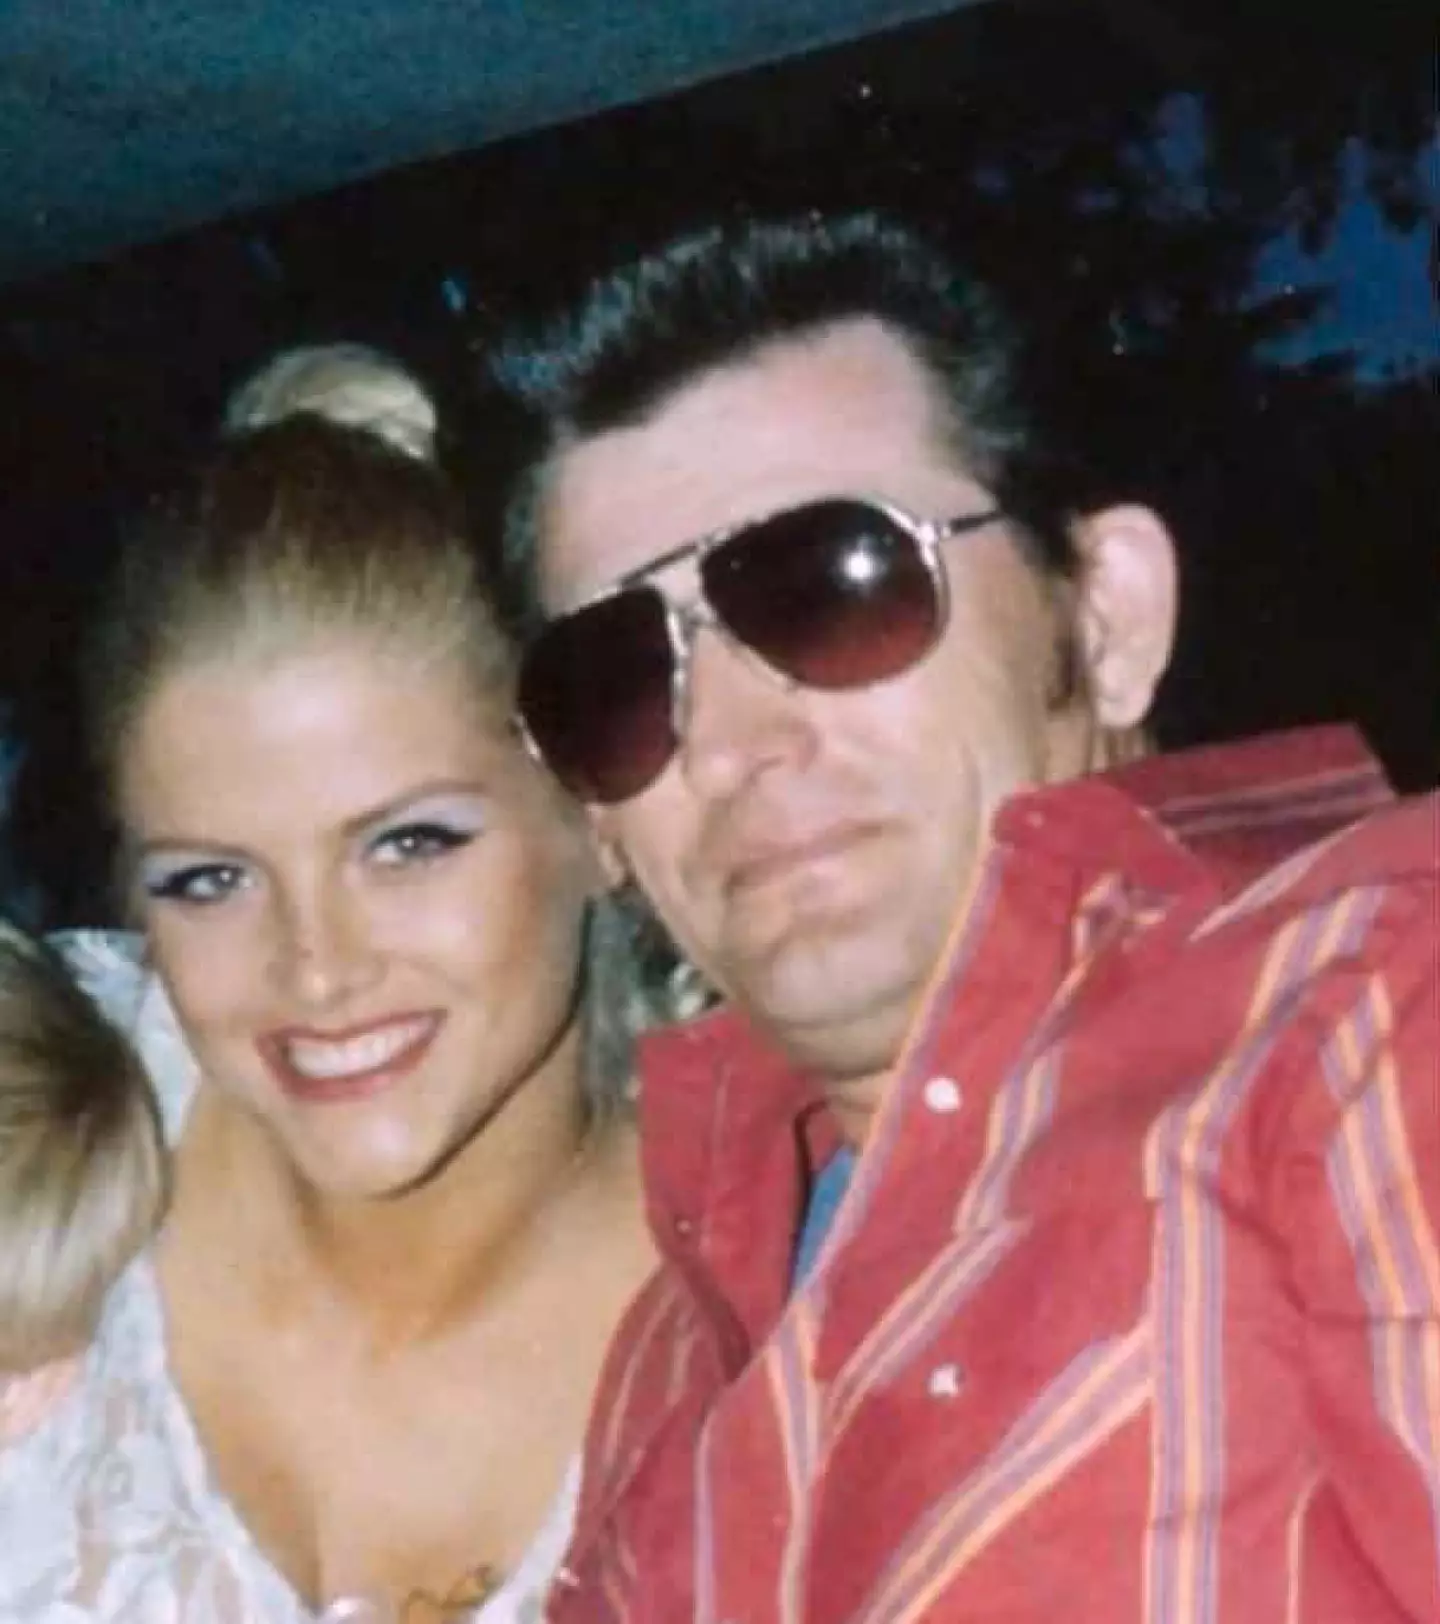 Anna Nicole Smith claimed her dad tried to have sex with her.